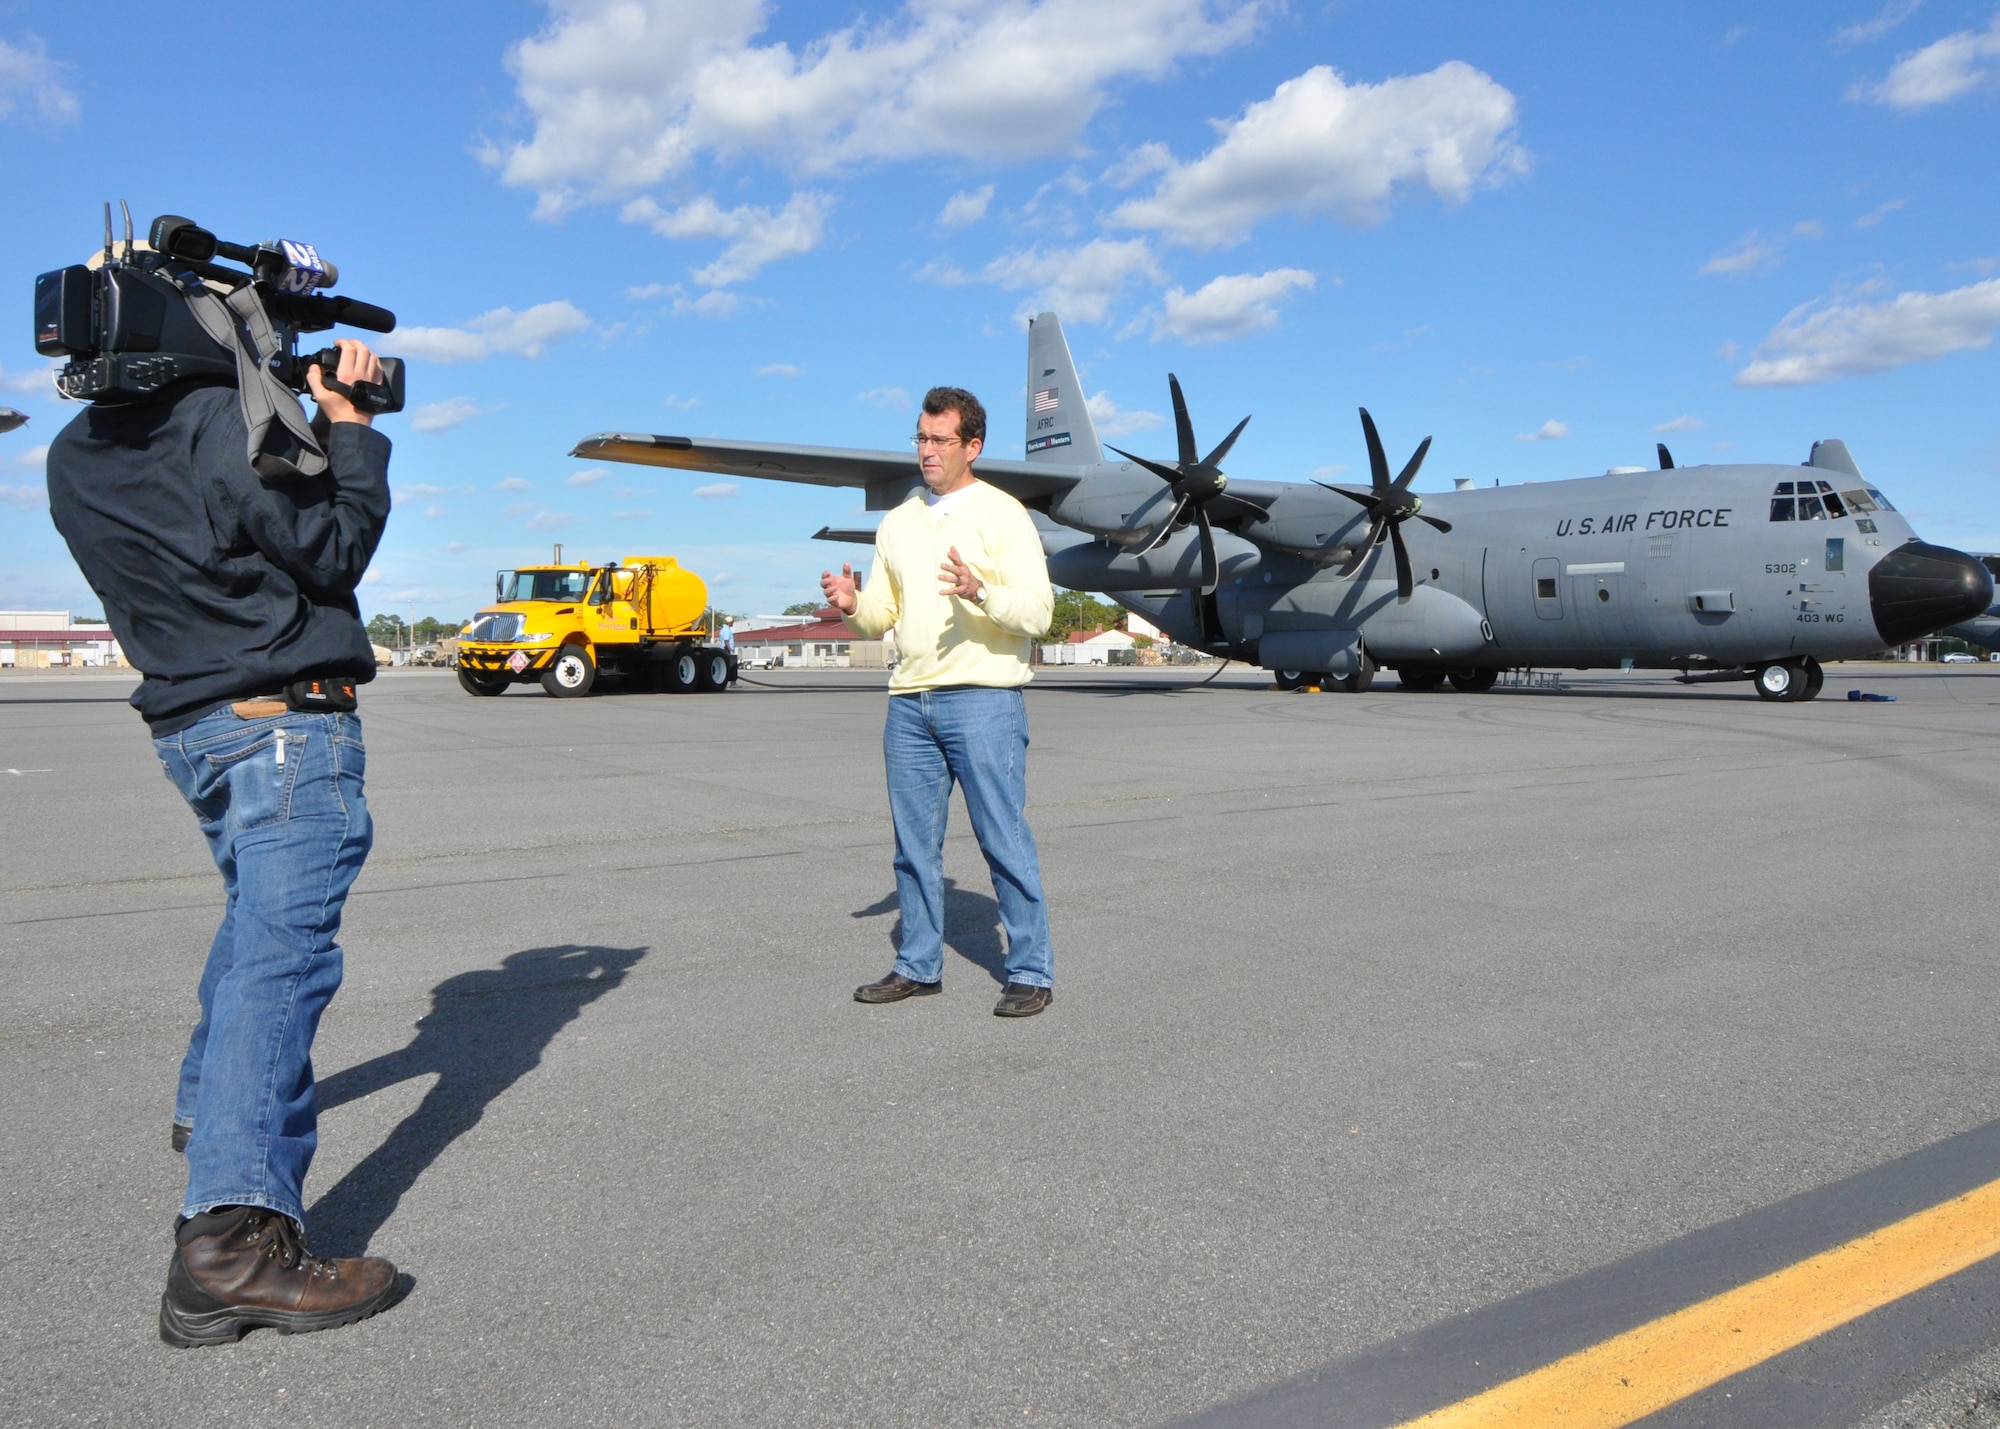 WCBD Chief Meteorologist Rob Fowler records a story on the flight line at Hunter Army Airfield, Ga. following a hurricane hunter mission flown into Hurricane Sandy Sunday. (U.S. Air Force photo / 1st Lt. Jeff Kelly)